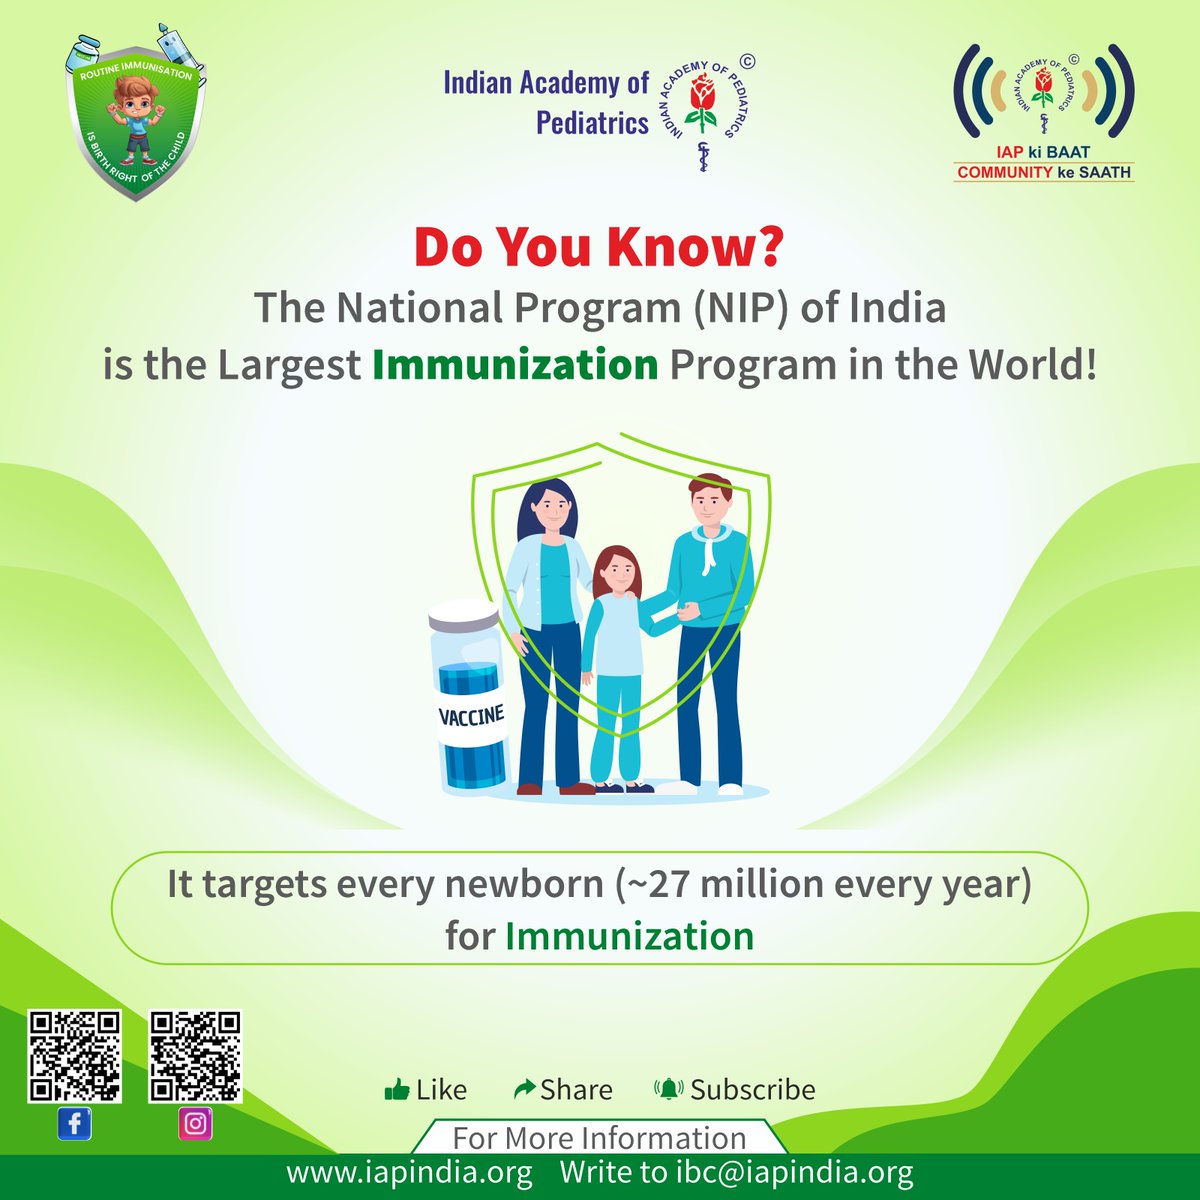 Did you know? 🤔 💉 The National #Immunization Program (NIP) in India is the largest in the world, protecting millions of lives through #vaccination efforts. Stay informed, stay healthy! 💚 #iapkibaat #IAP #indianacademyofpediatrics #pediatricians #childcare